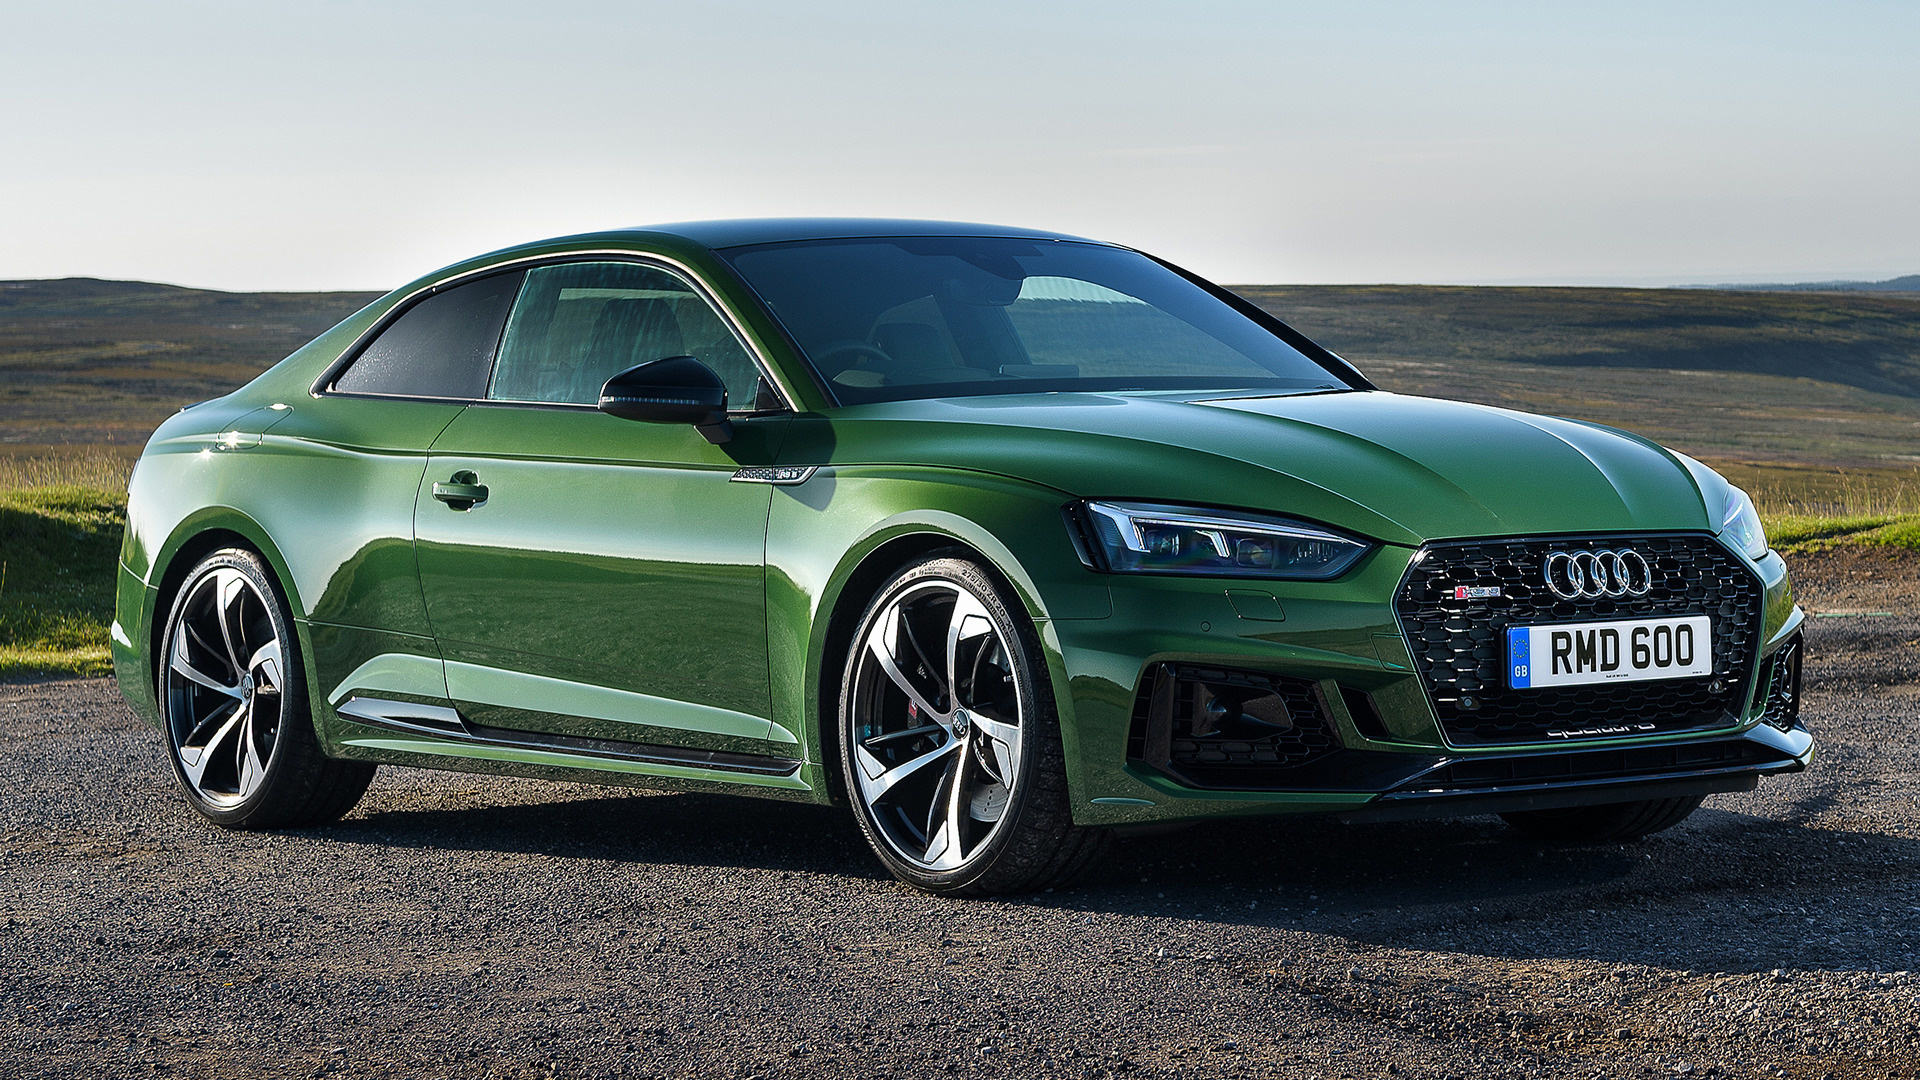 Vehicles Audi RS5 HD Wallpaper | Background Image